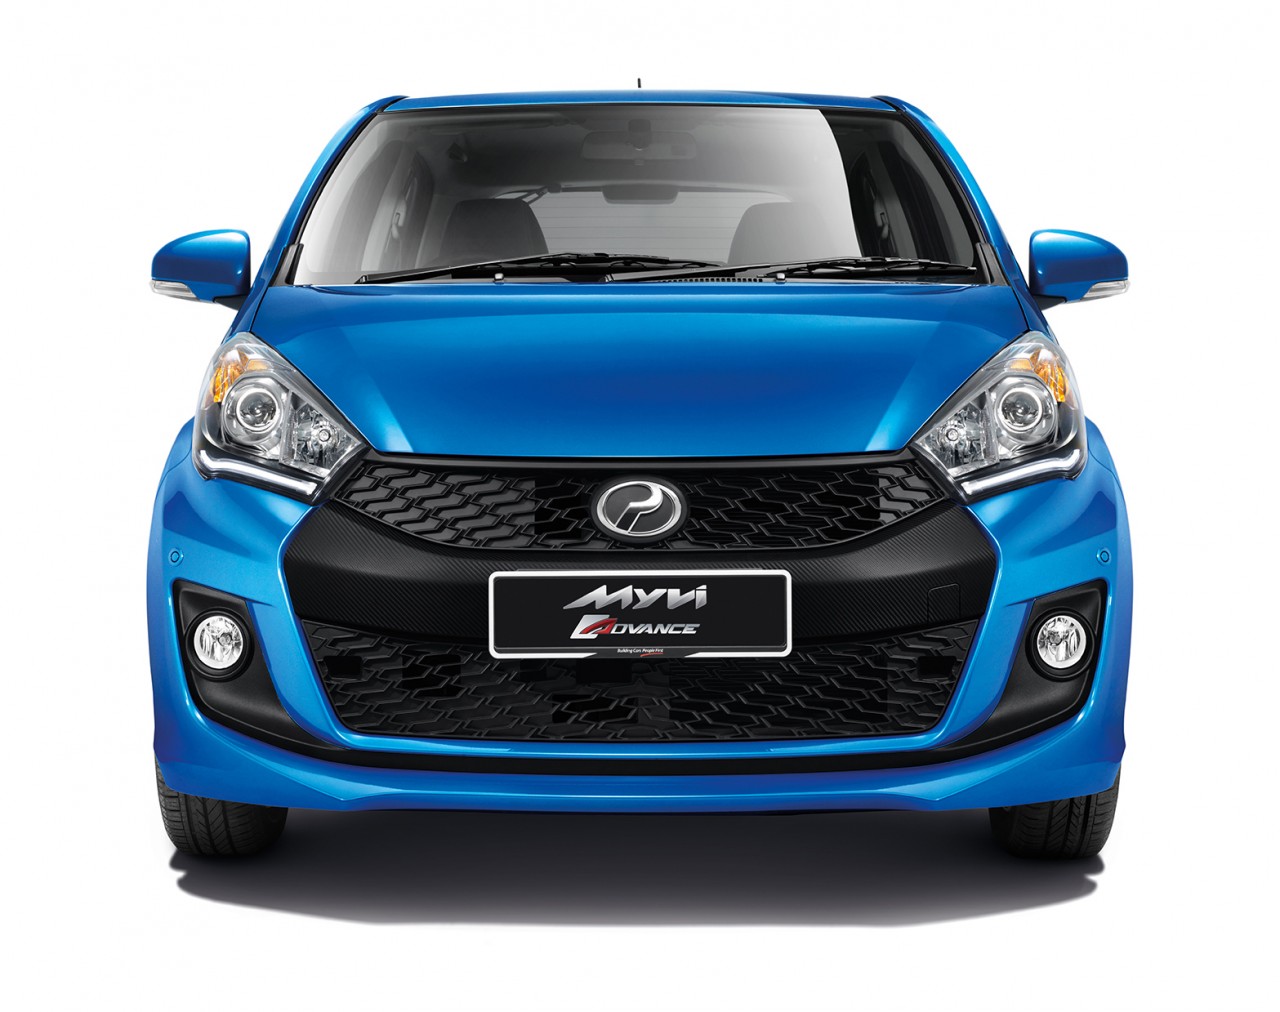 2015 Perodua Myvi (facelift) launched in Malaysia